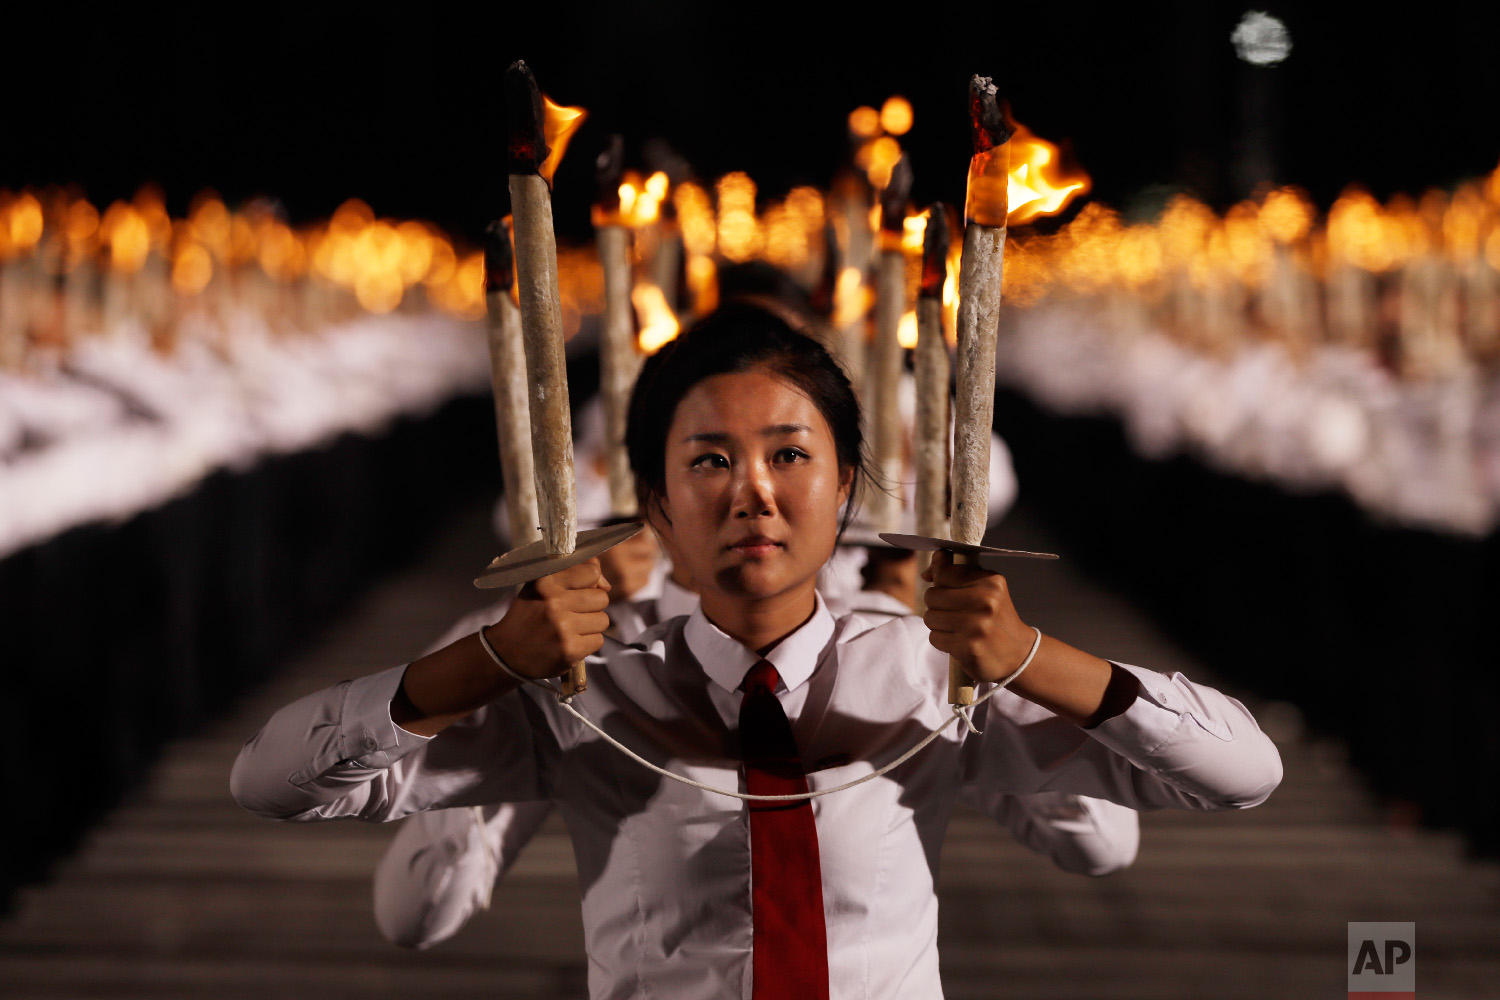  North Korean youths hold torches during a torch light march at the Kim Il Sung Square in conjunction with the 70th anniversary of North Korea's founding day in Pyongyang, North Korea, on Sept. 10, 2018. (AP Photo/Kin Cheung) 